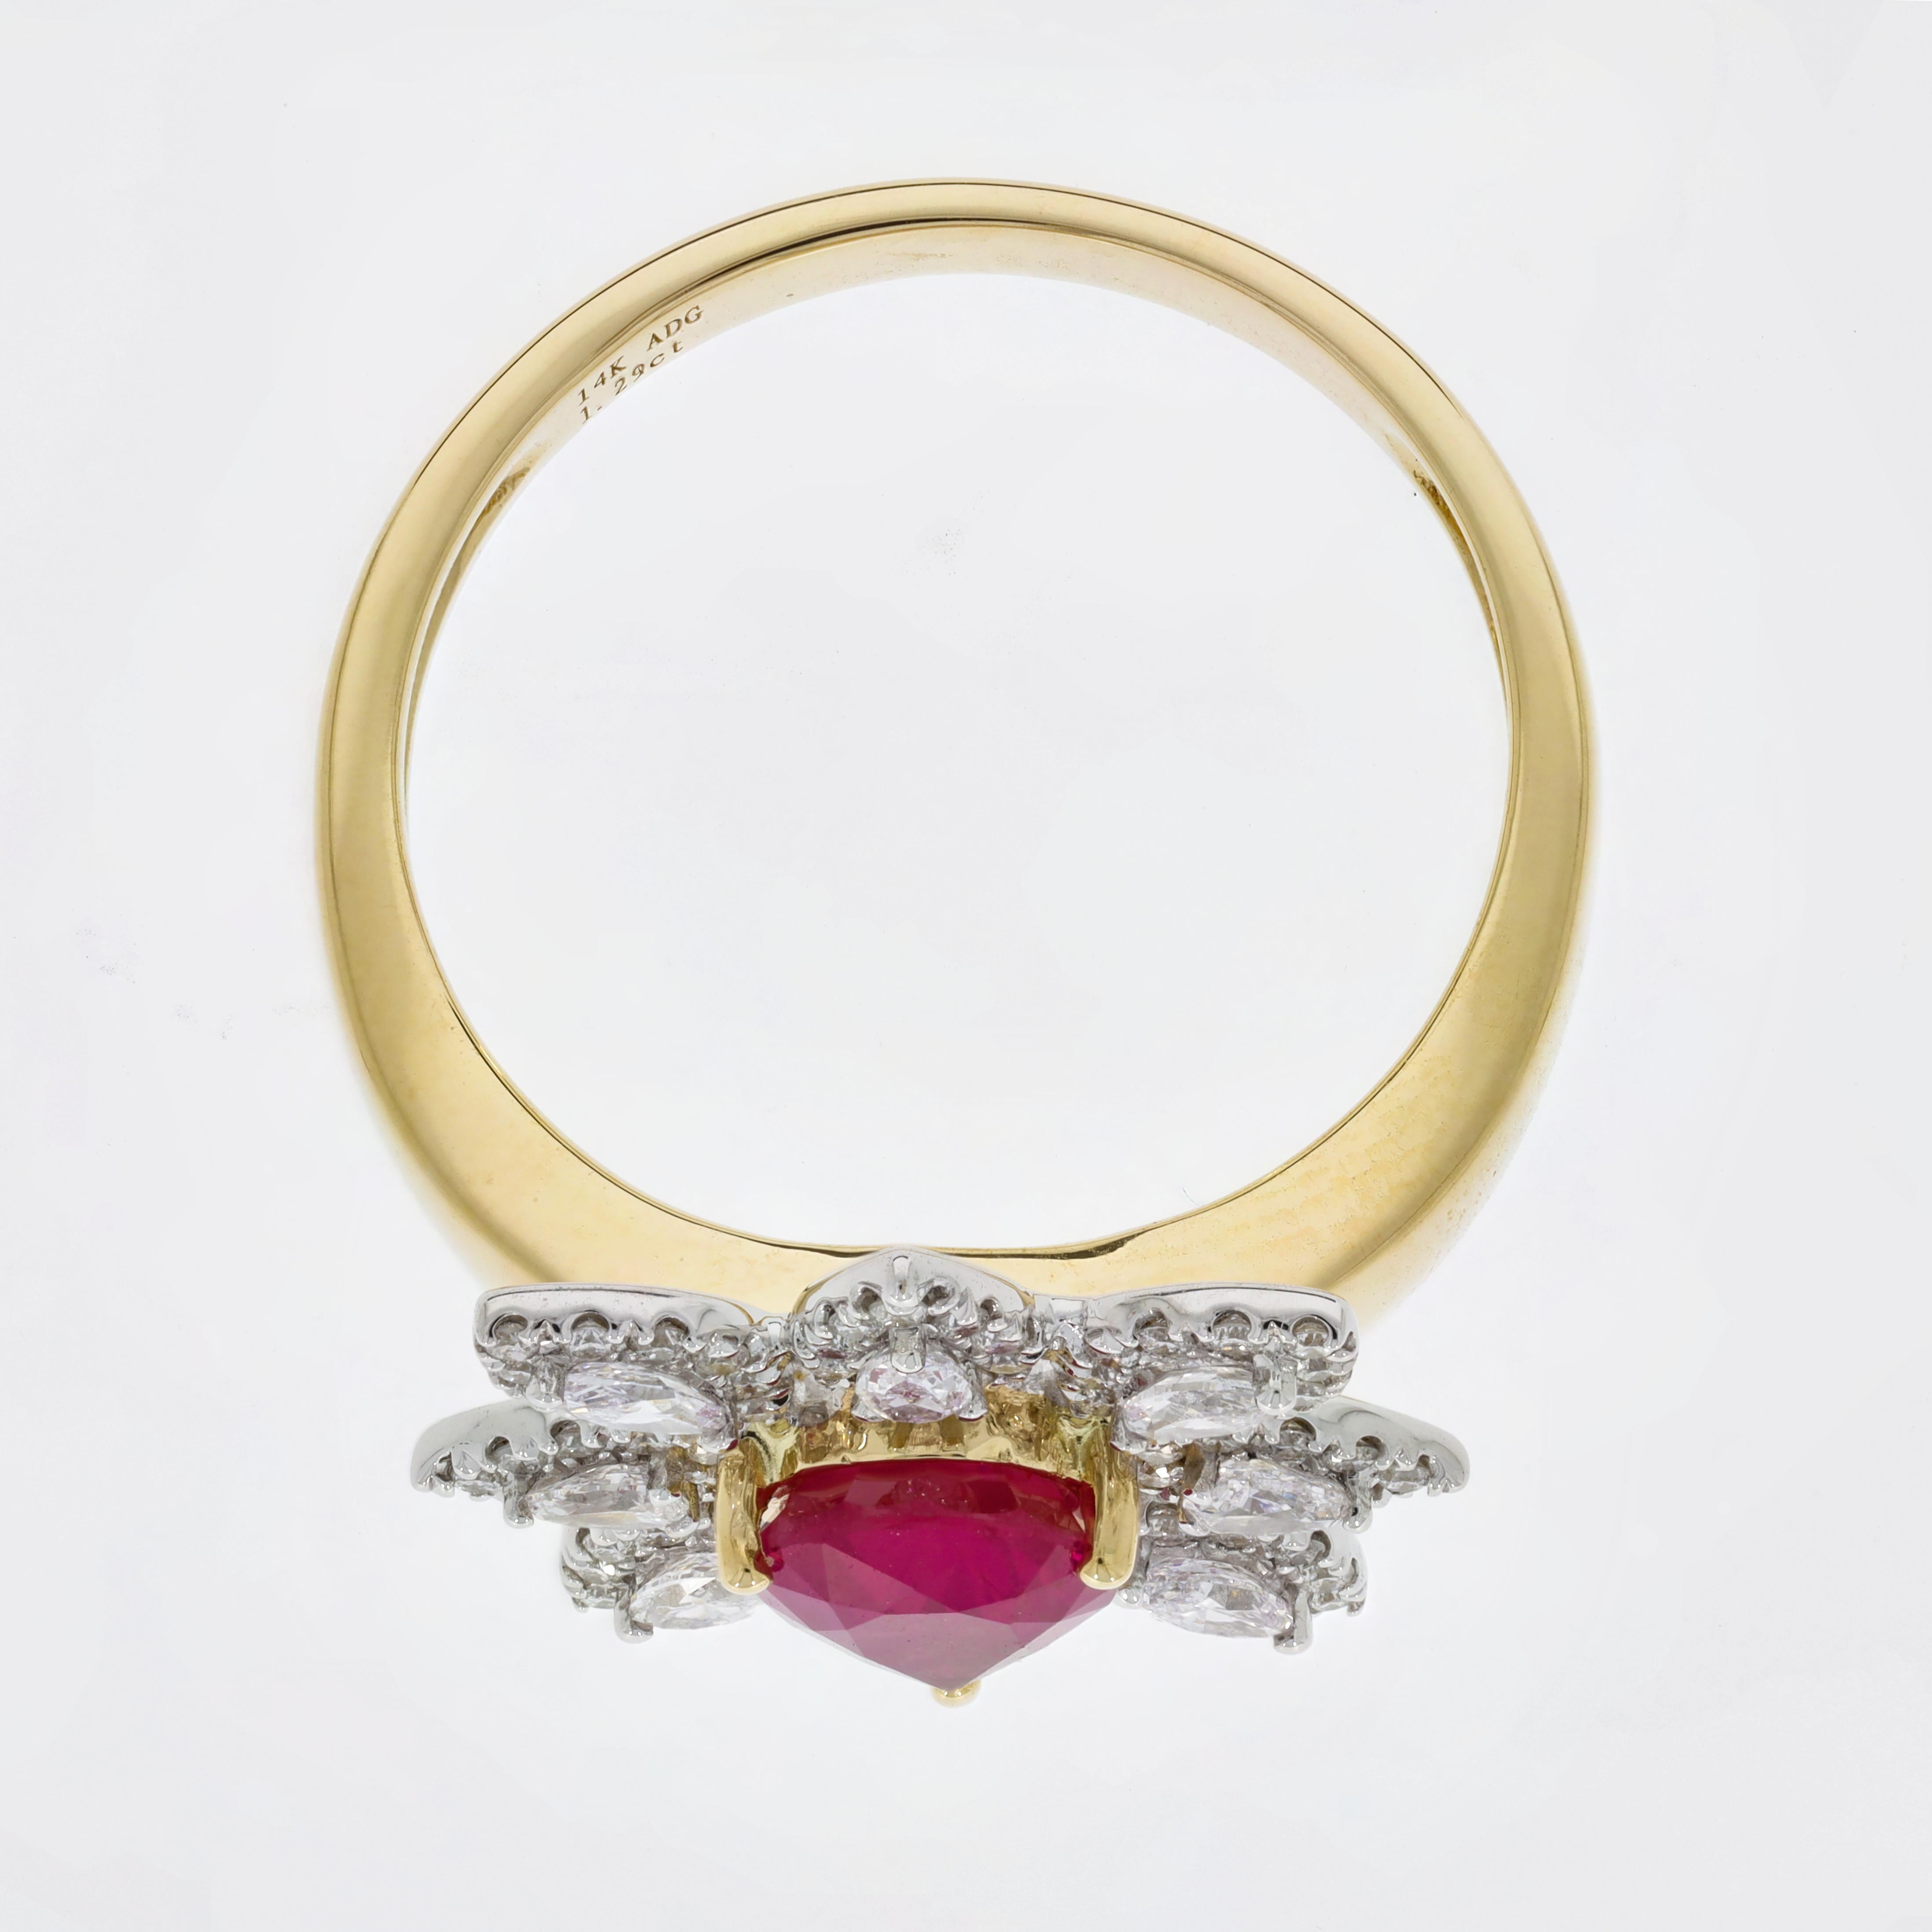 This stunningly vivid 1.29 carat unheated ruby is cut in an alluring pear shape and adorned with 0.58 carats of accent diamonds set in gorgeous two-toned white and yellow gold. This gorgeous and classy ring is perfect for a night out with your loved